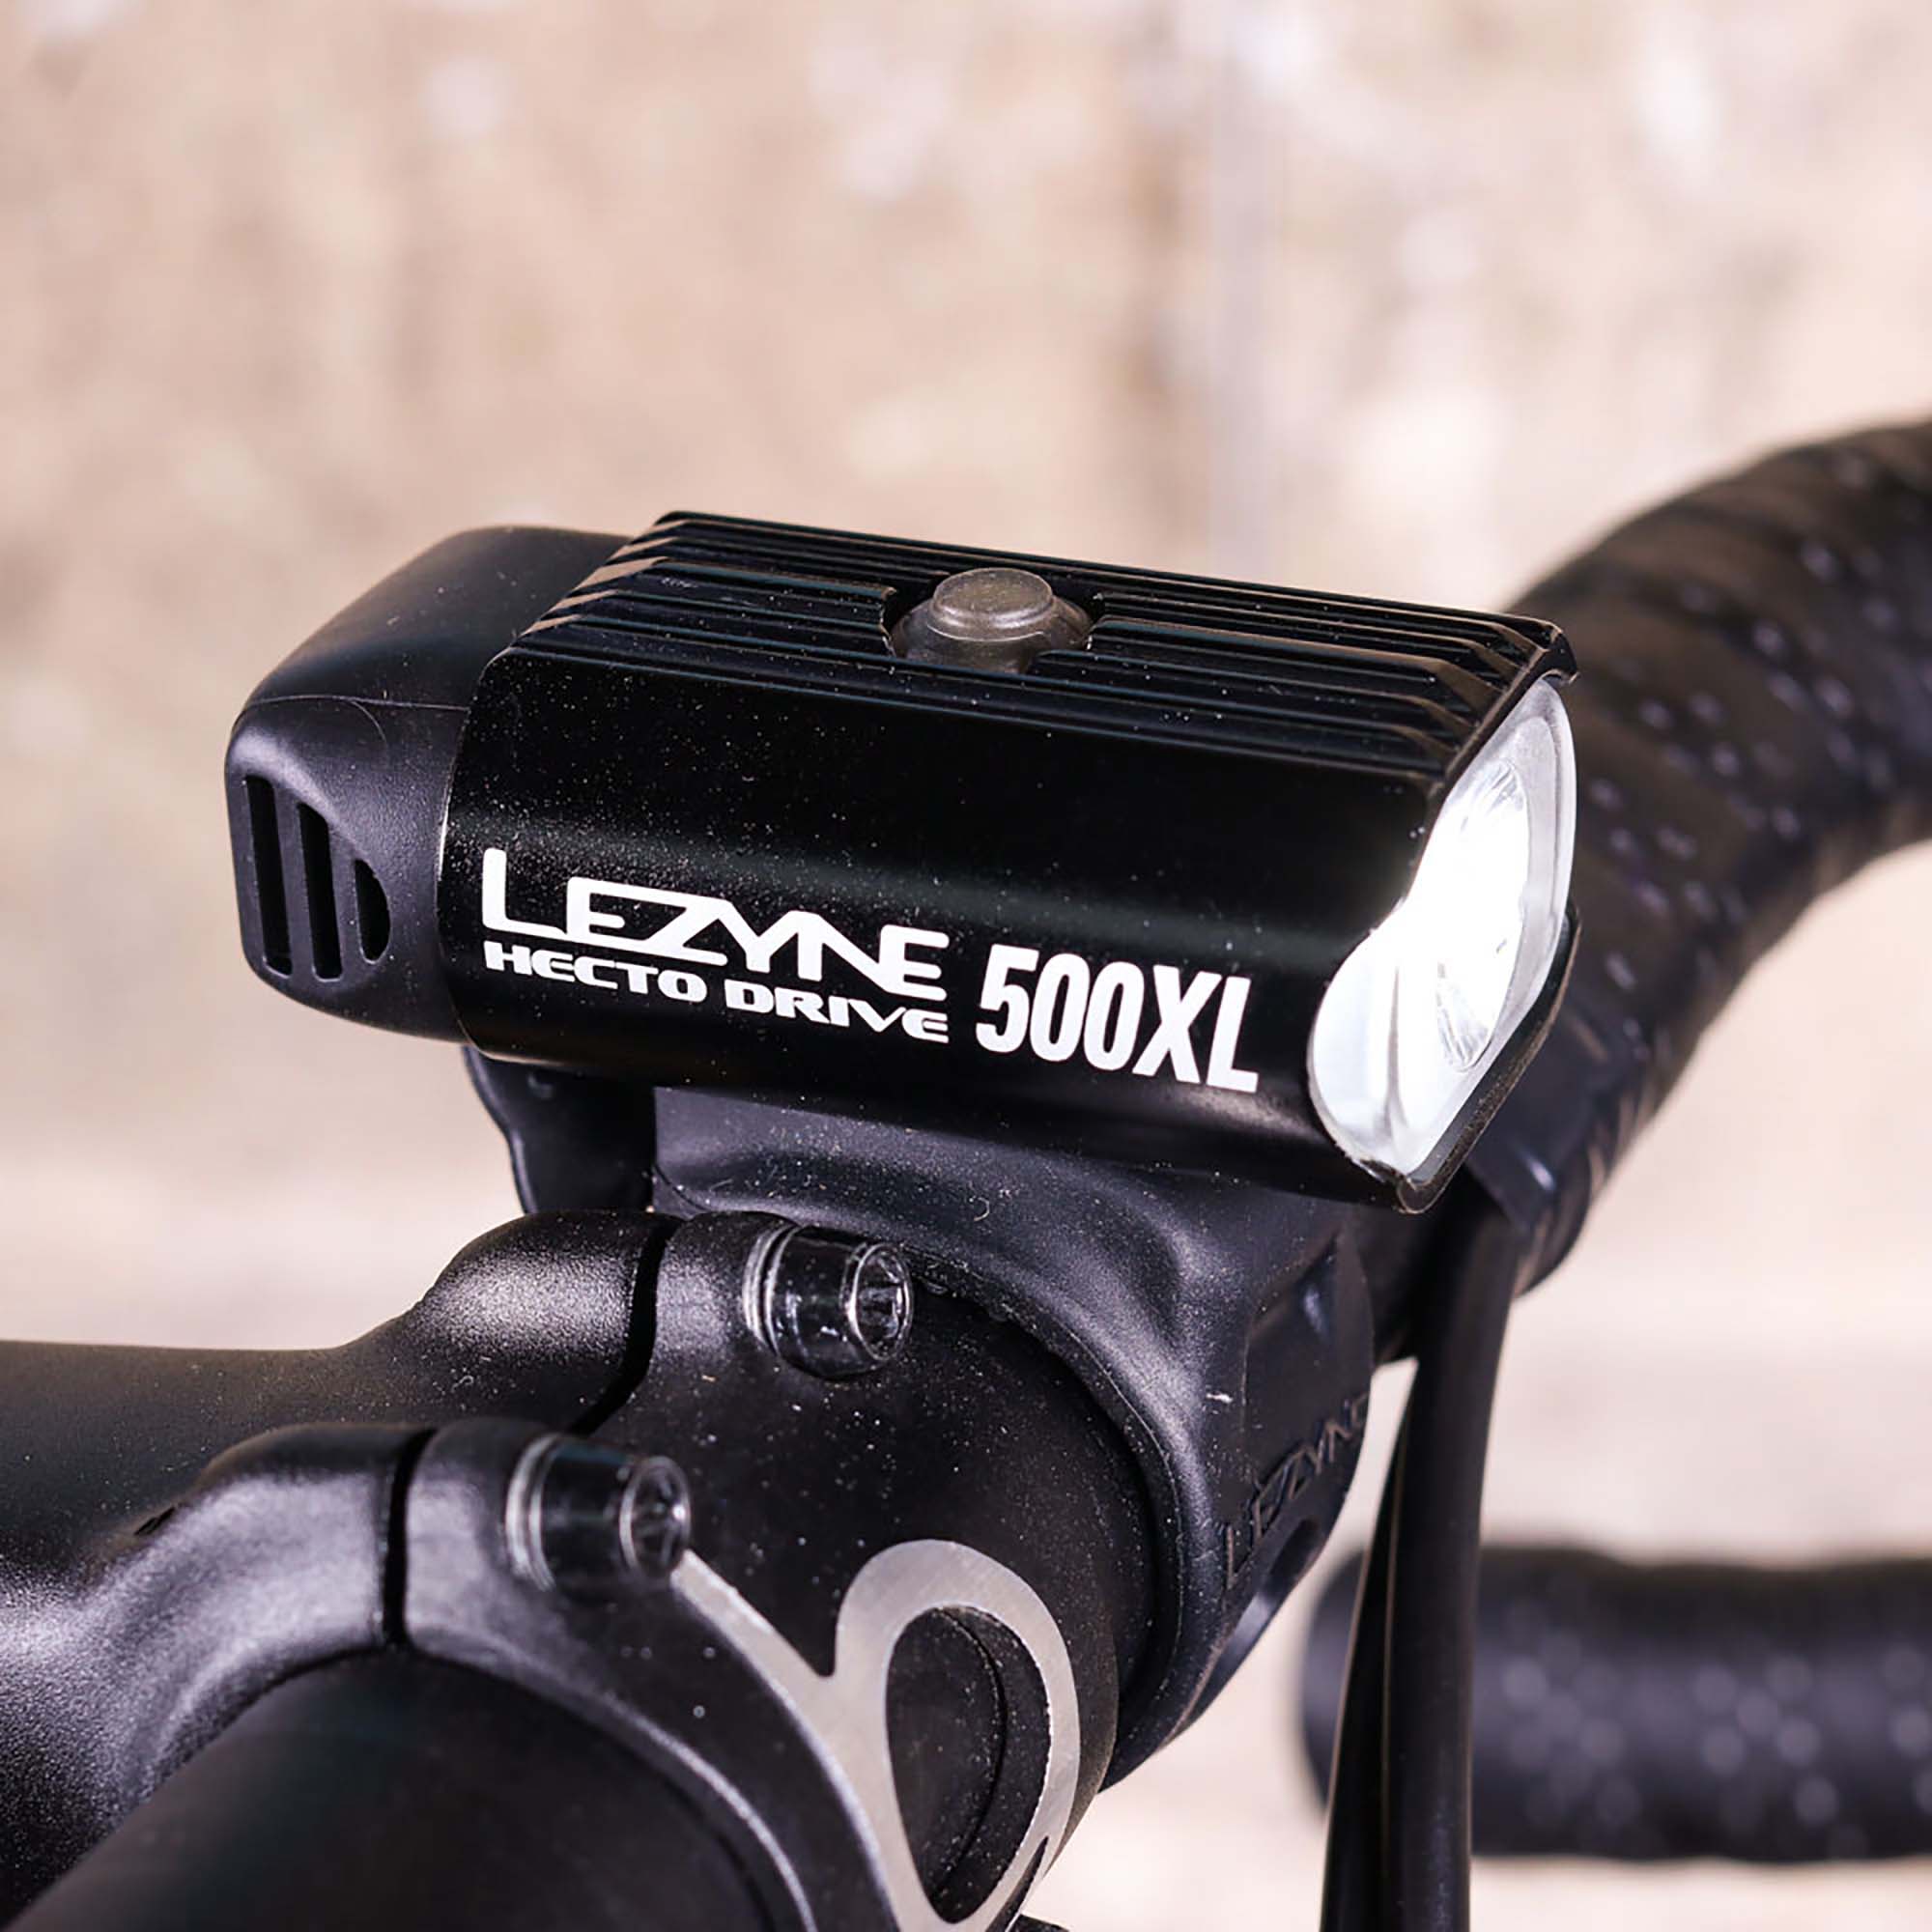 Review: Lezyne Hecto Drive 500XL front light | road.cc